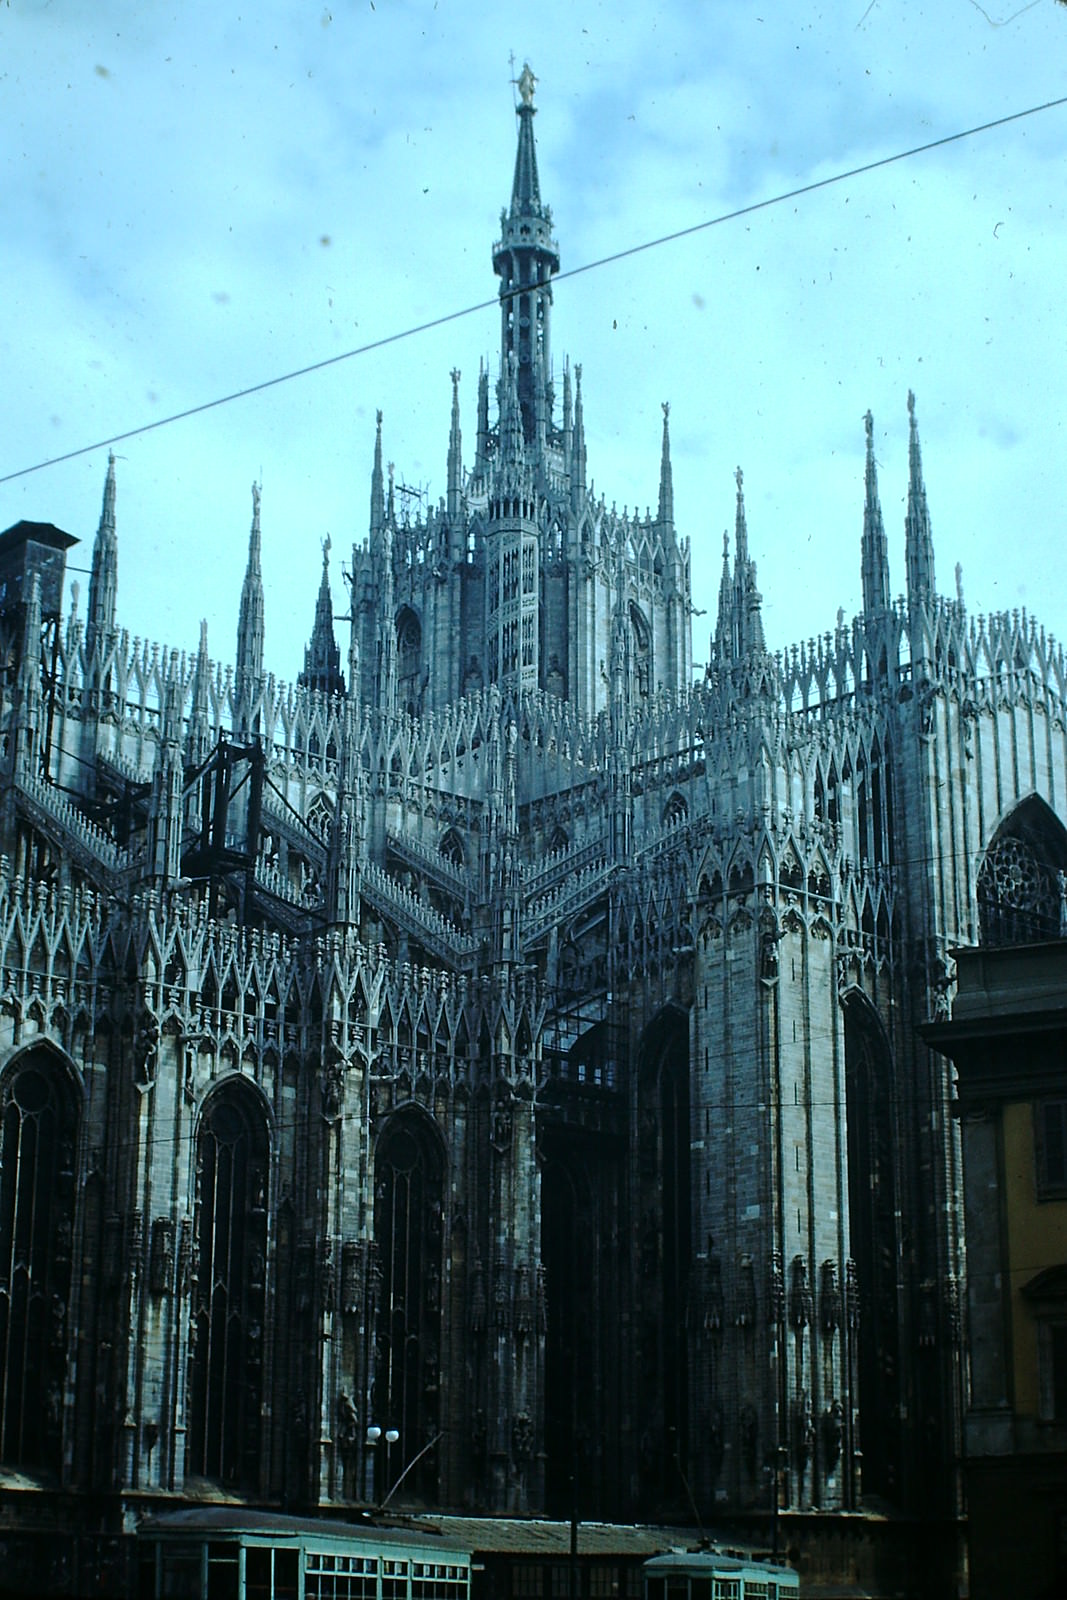 Cathedral Milan, Italy, 1954.